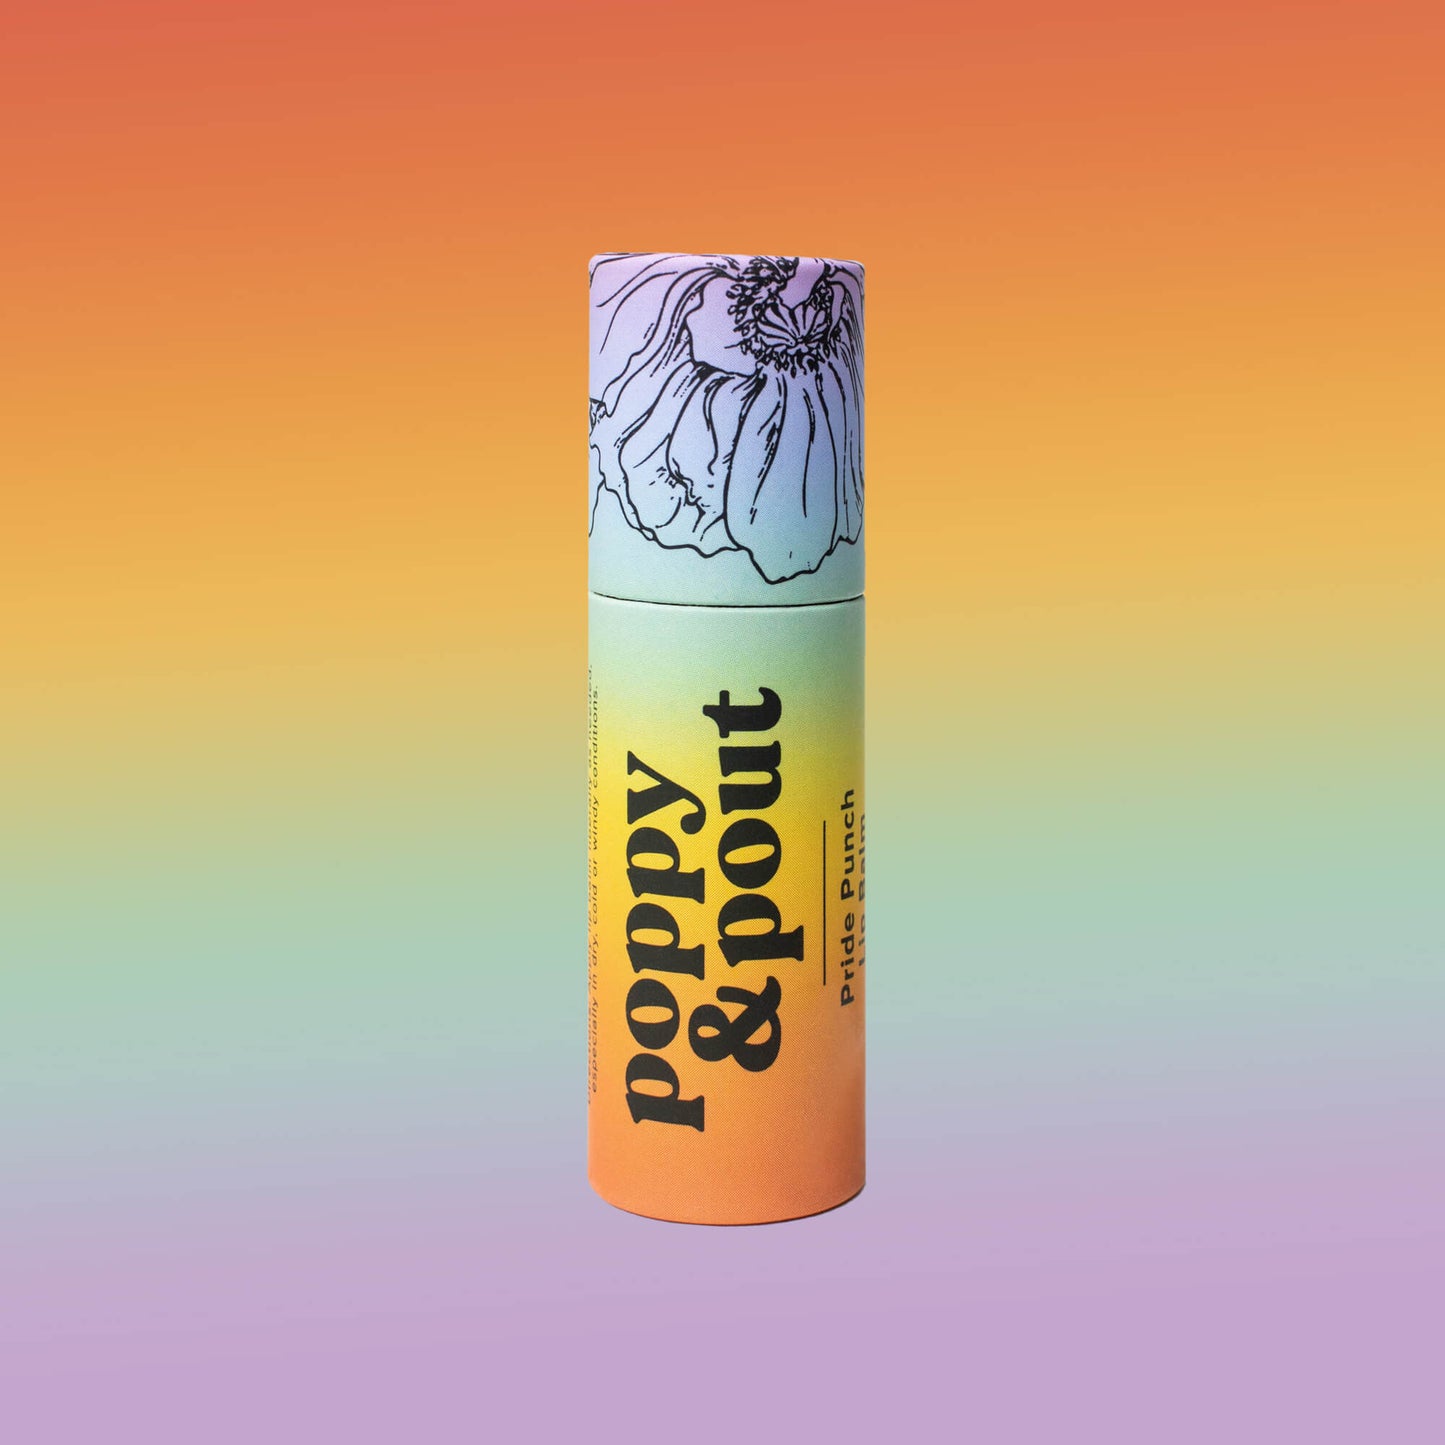 Pride Punch Poppy & Pout Lip Balm (LIMITED EDITION) - Now Vegan!